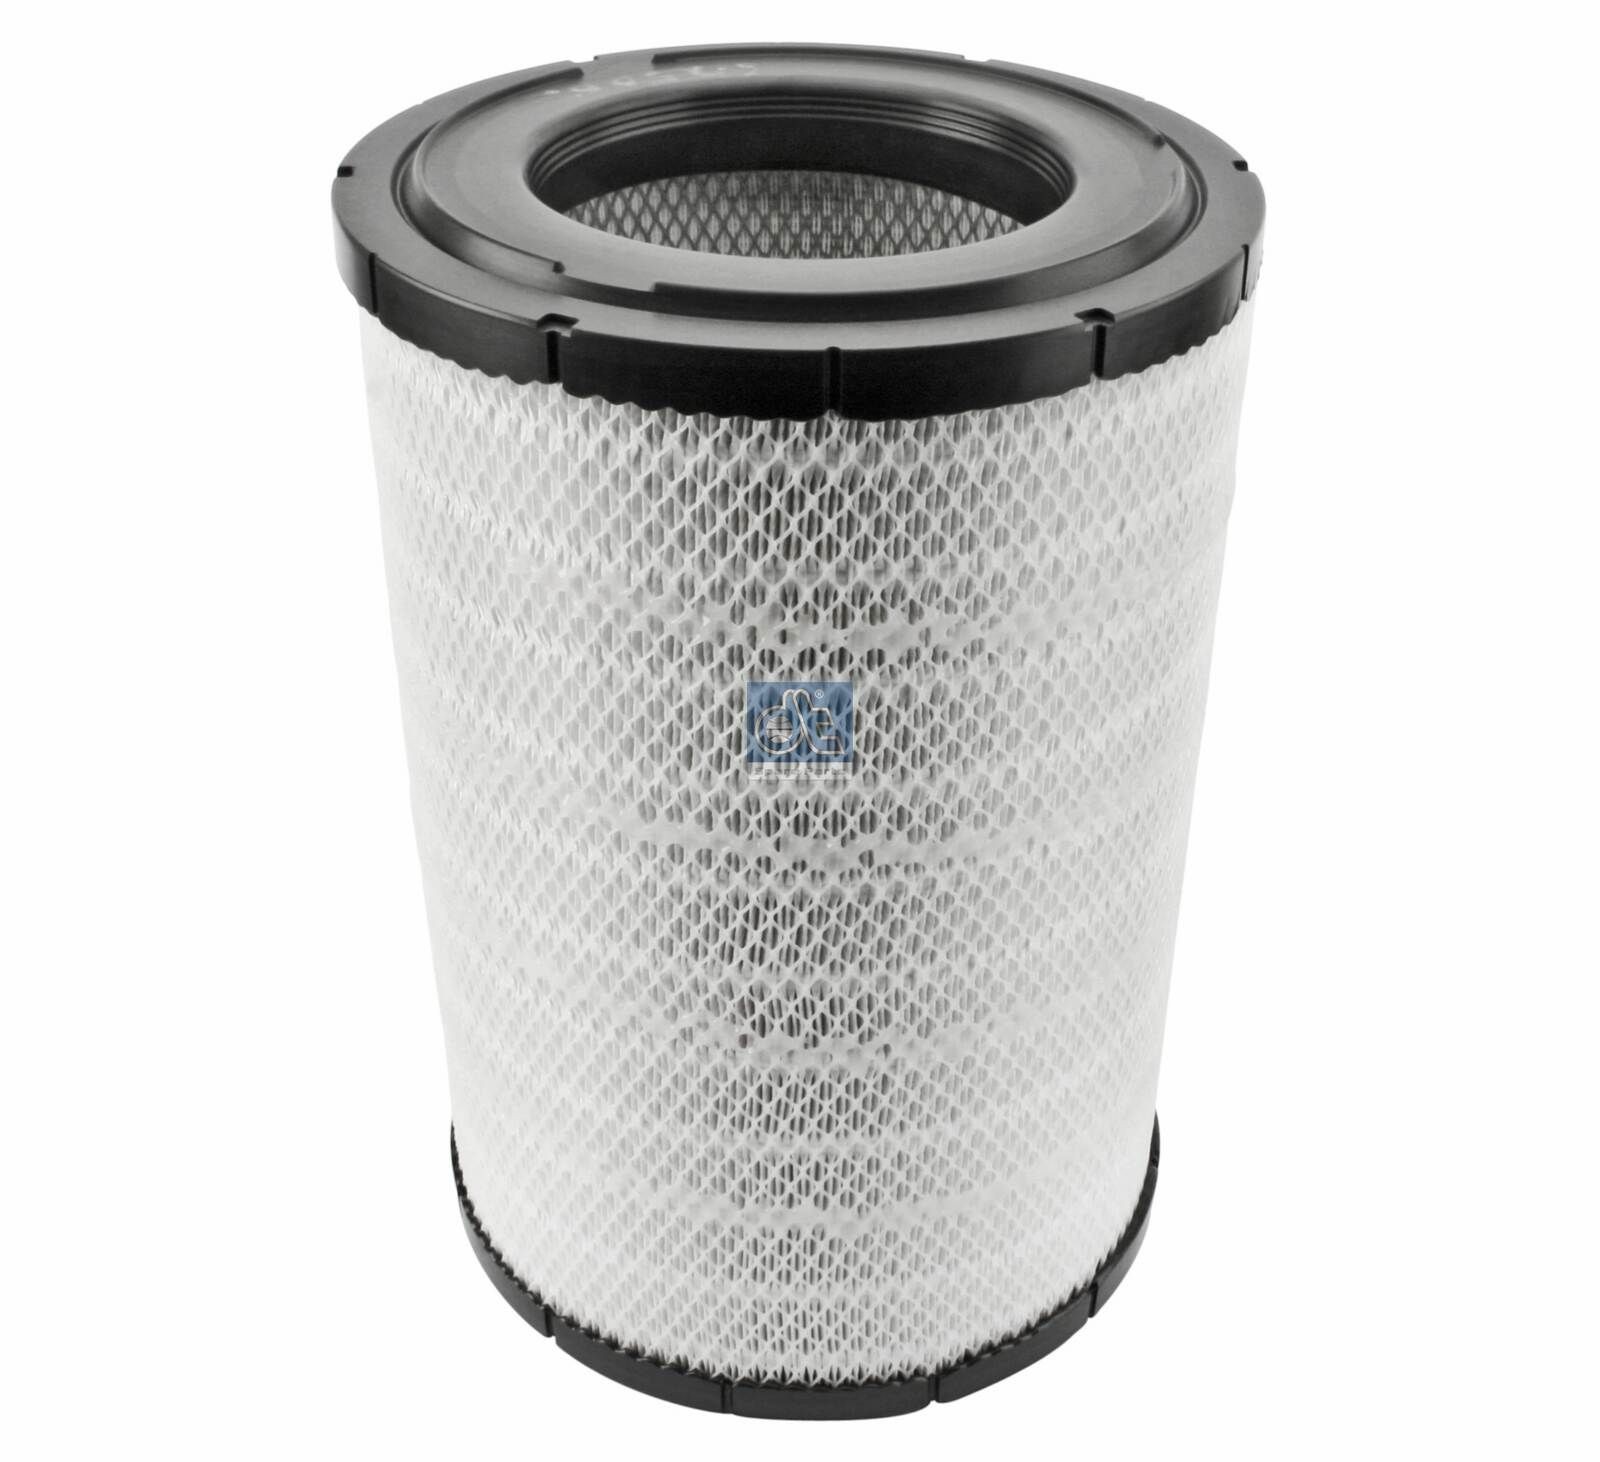 DT Spare Parts 464mm, 312mm, Filter Insert Height: 464mm Engine air filter 6.25002 buy